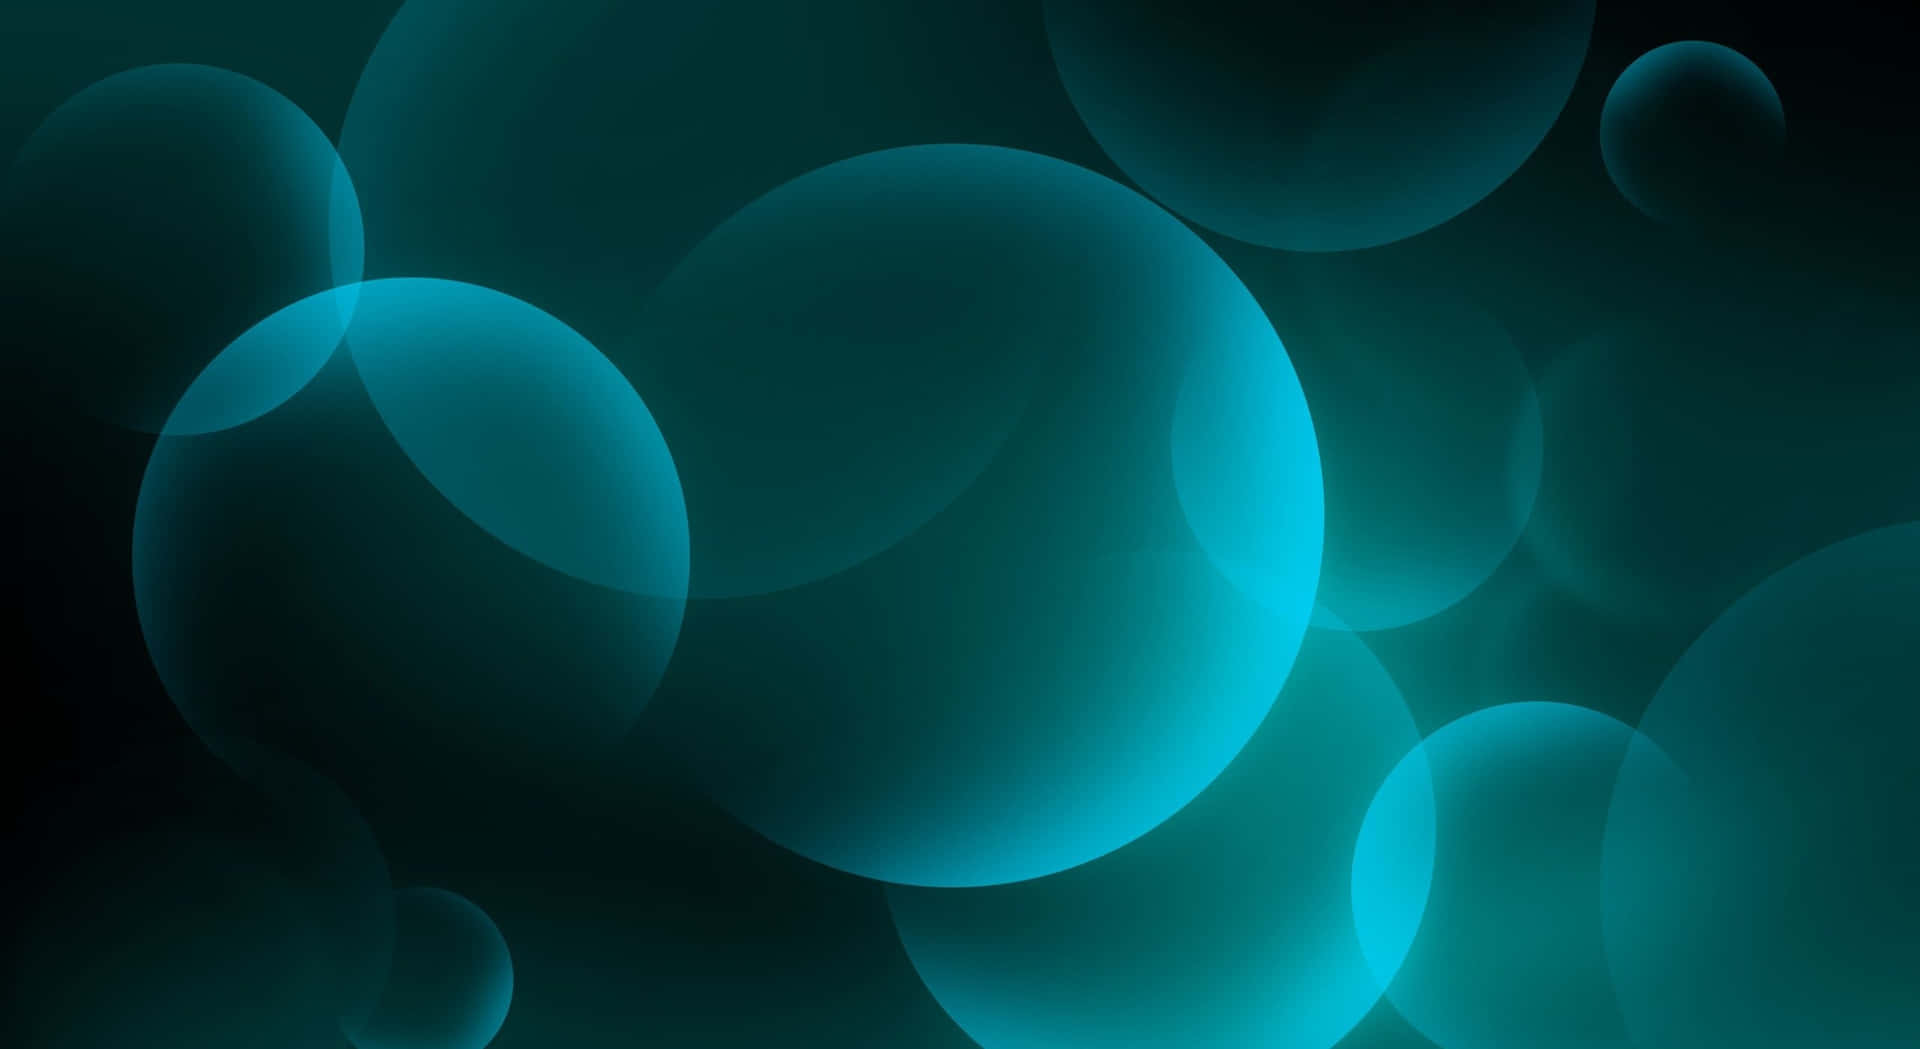 Abstract turquoise background evokes creativity and positivity